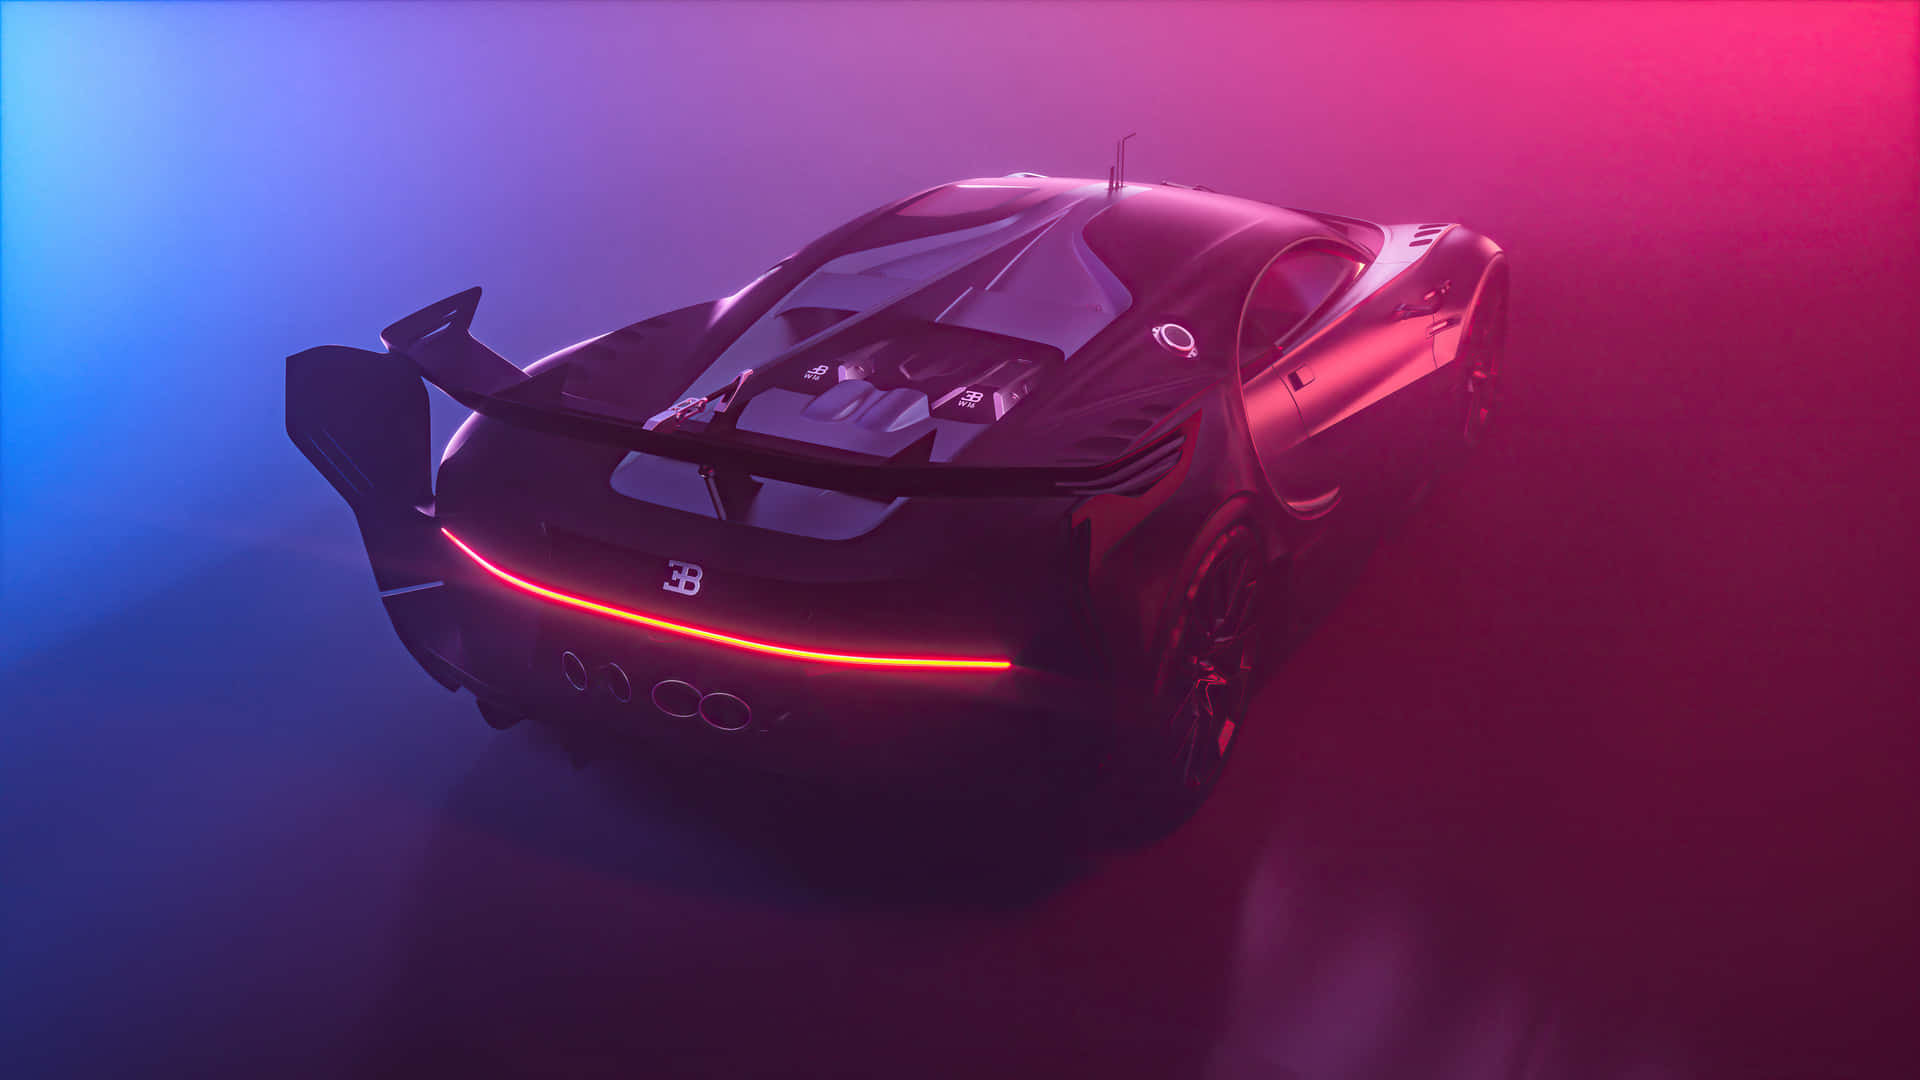 "A Neon Bugatti - This Iconic Supercar Lights up the Night!" Wallpaper